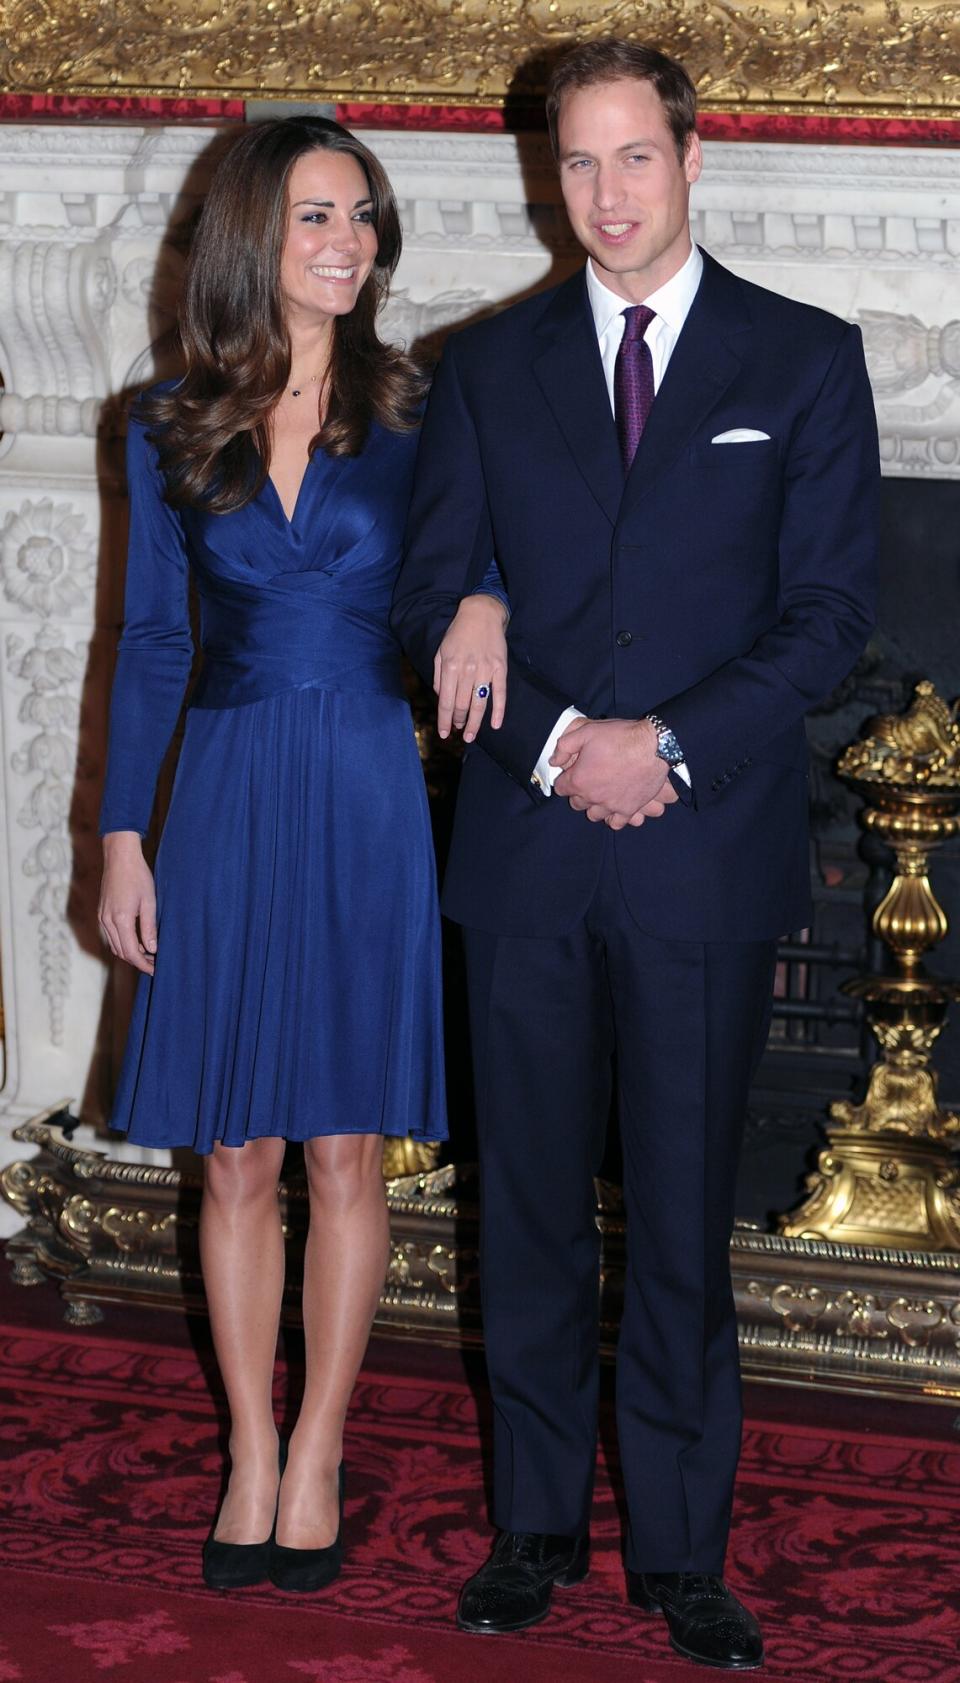 Prince William and Catherine Middleton pose for photographs in the State Apartments of St James Palace as they announce their engagement on November 16, 2010 in London, England